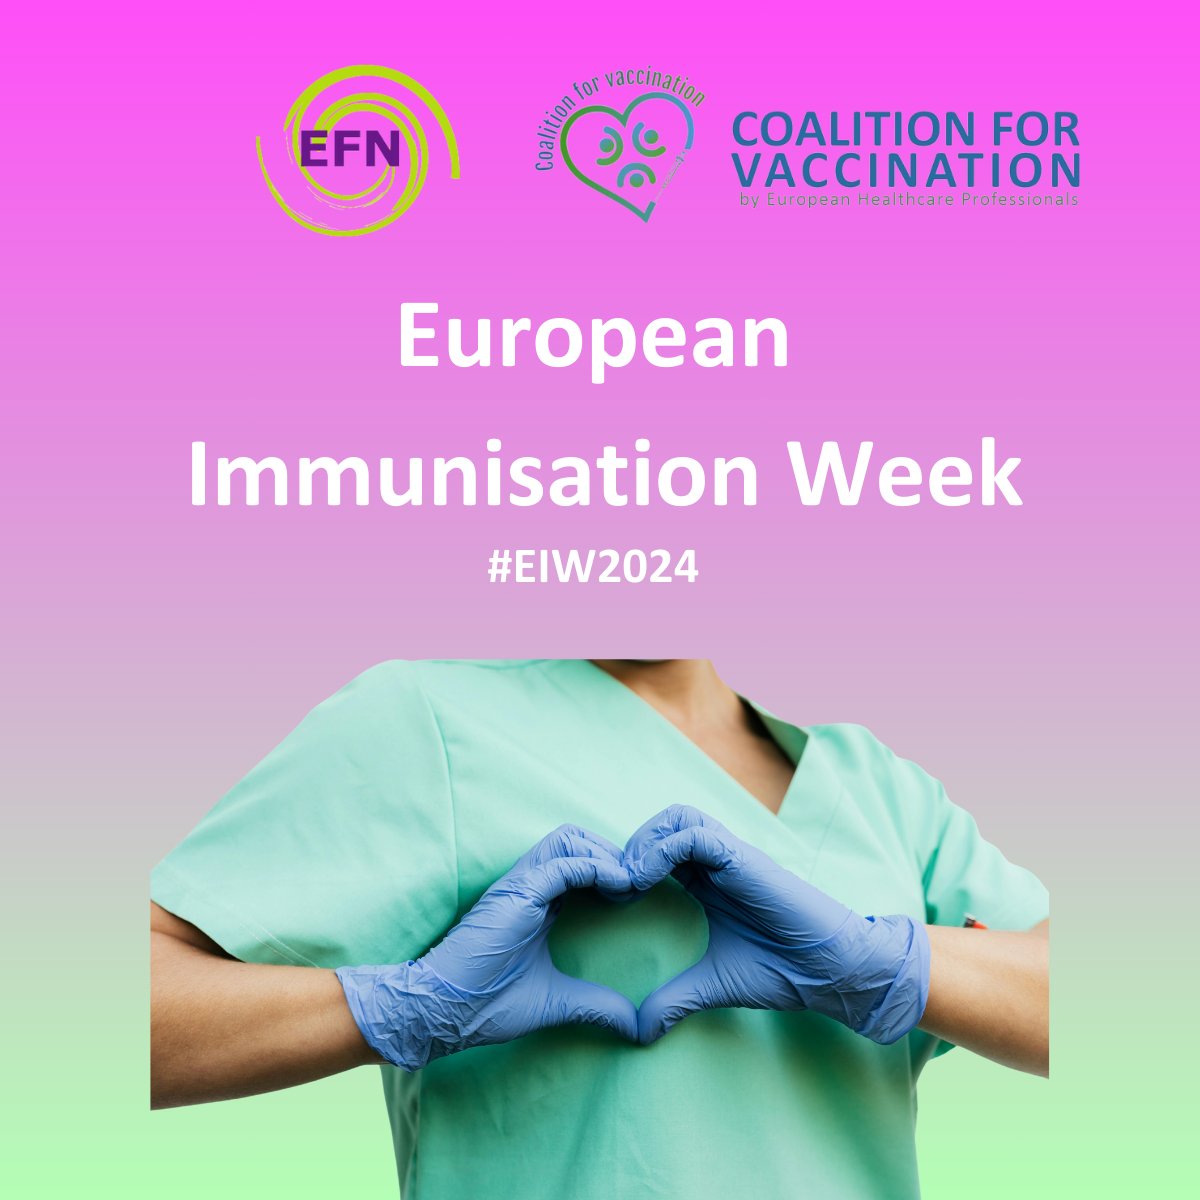 The #EIW2024 is officially drawing to a close. We want to thank all the frontline healthcare professionals that are working towards ensuring safe and fair access to vaccines for all. #EFN #EIW2024 #GetVaccinated #Nurses #Prevention #Longlifeforall #EPI #Vaccinesforall